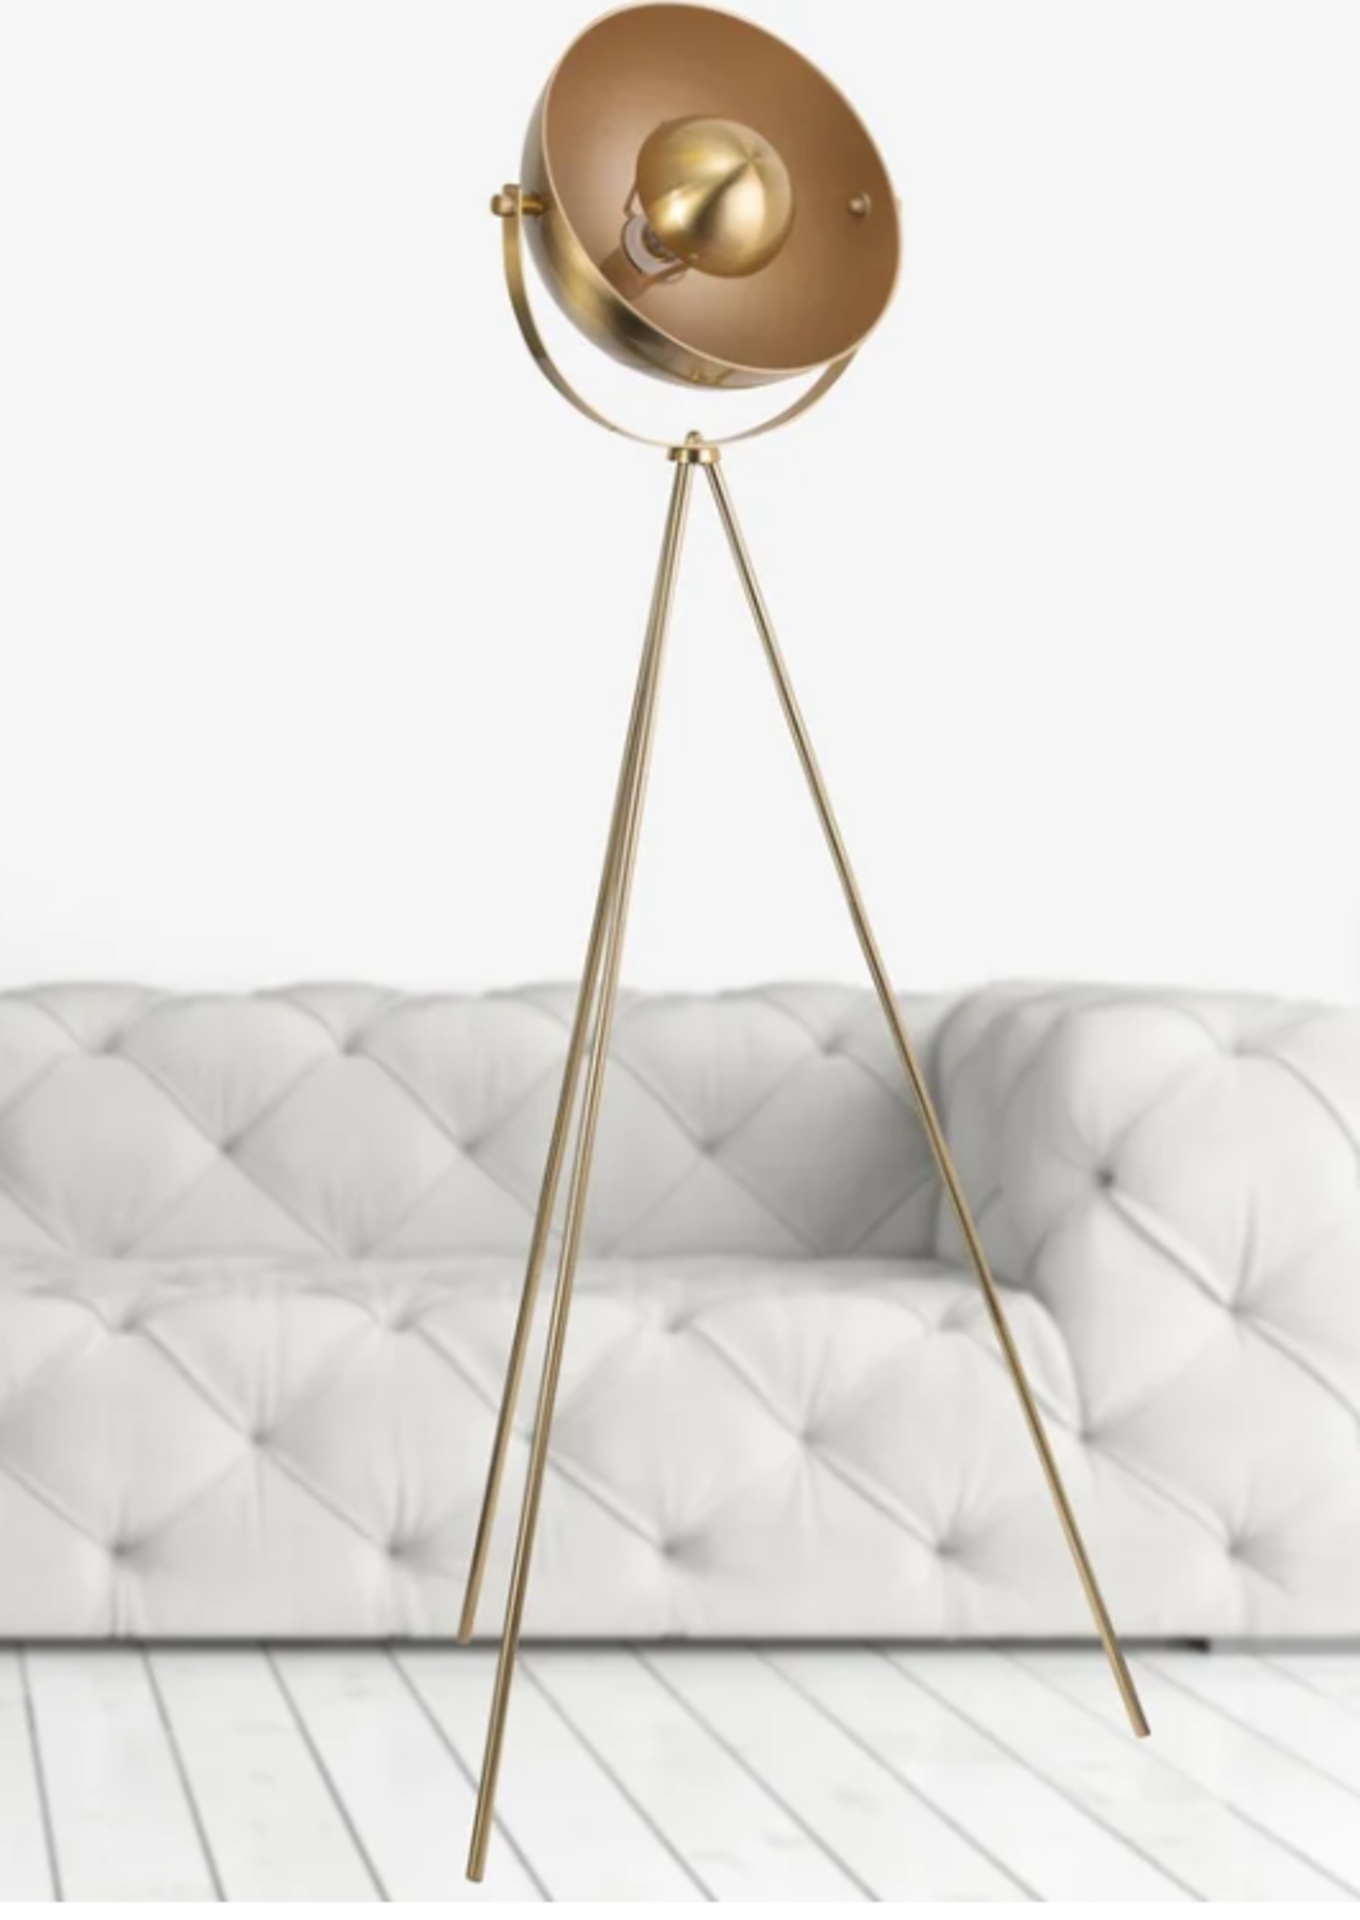 Mallen 150cm Tripod Floor Lamp. This tripod lamp is suitable for the hallway, home office, study, - Image 2 of 2